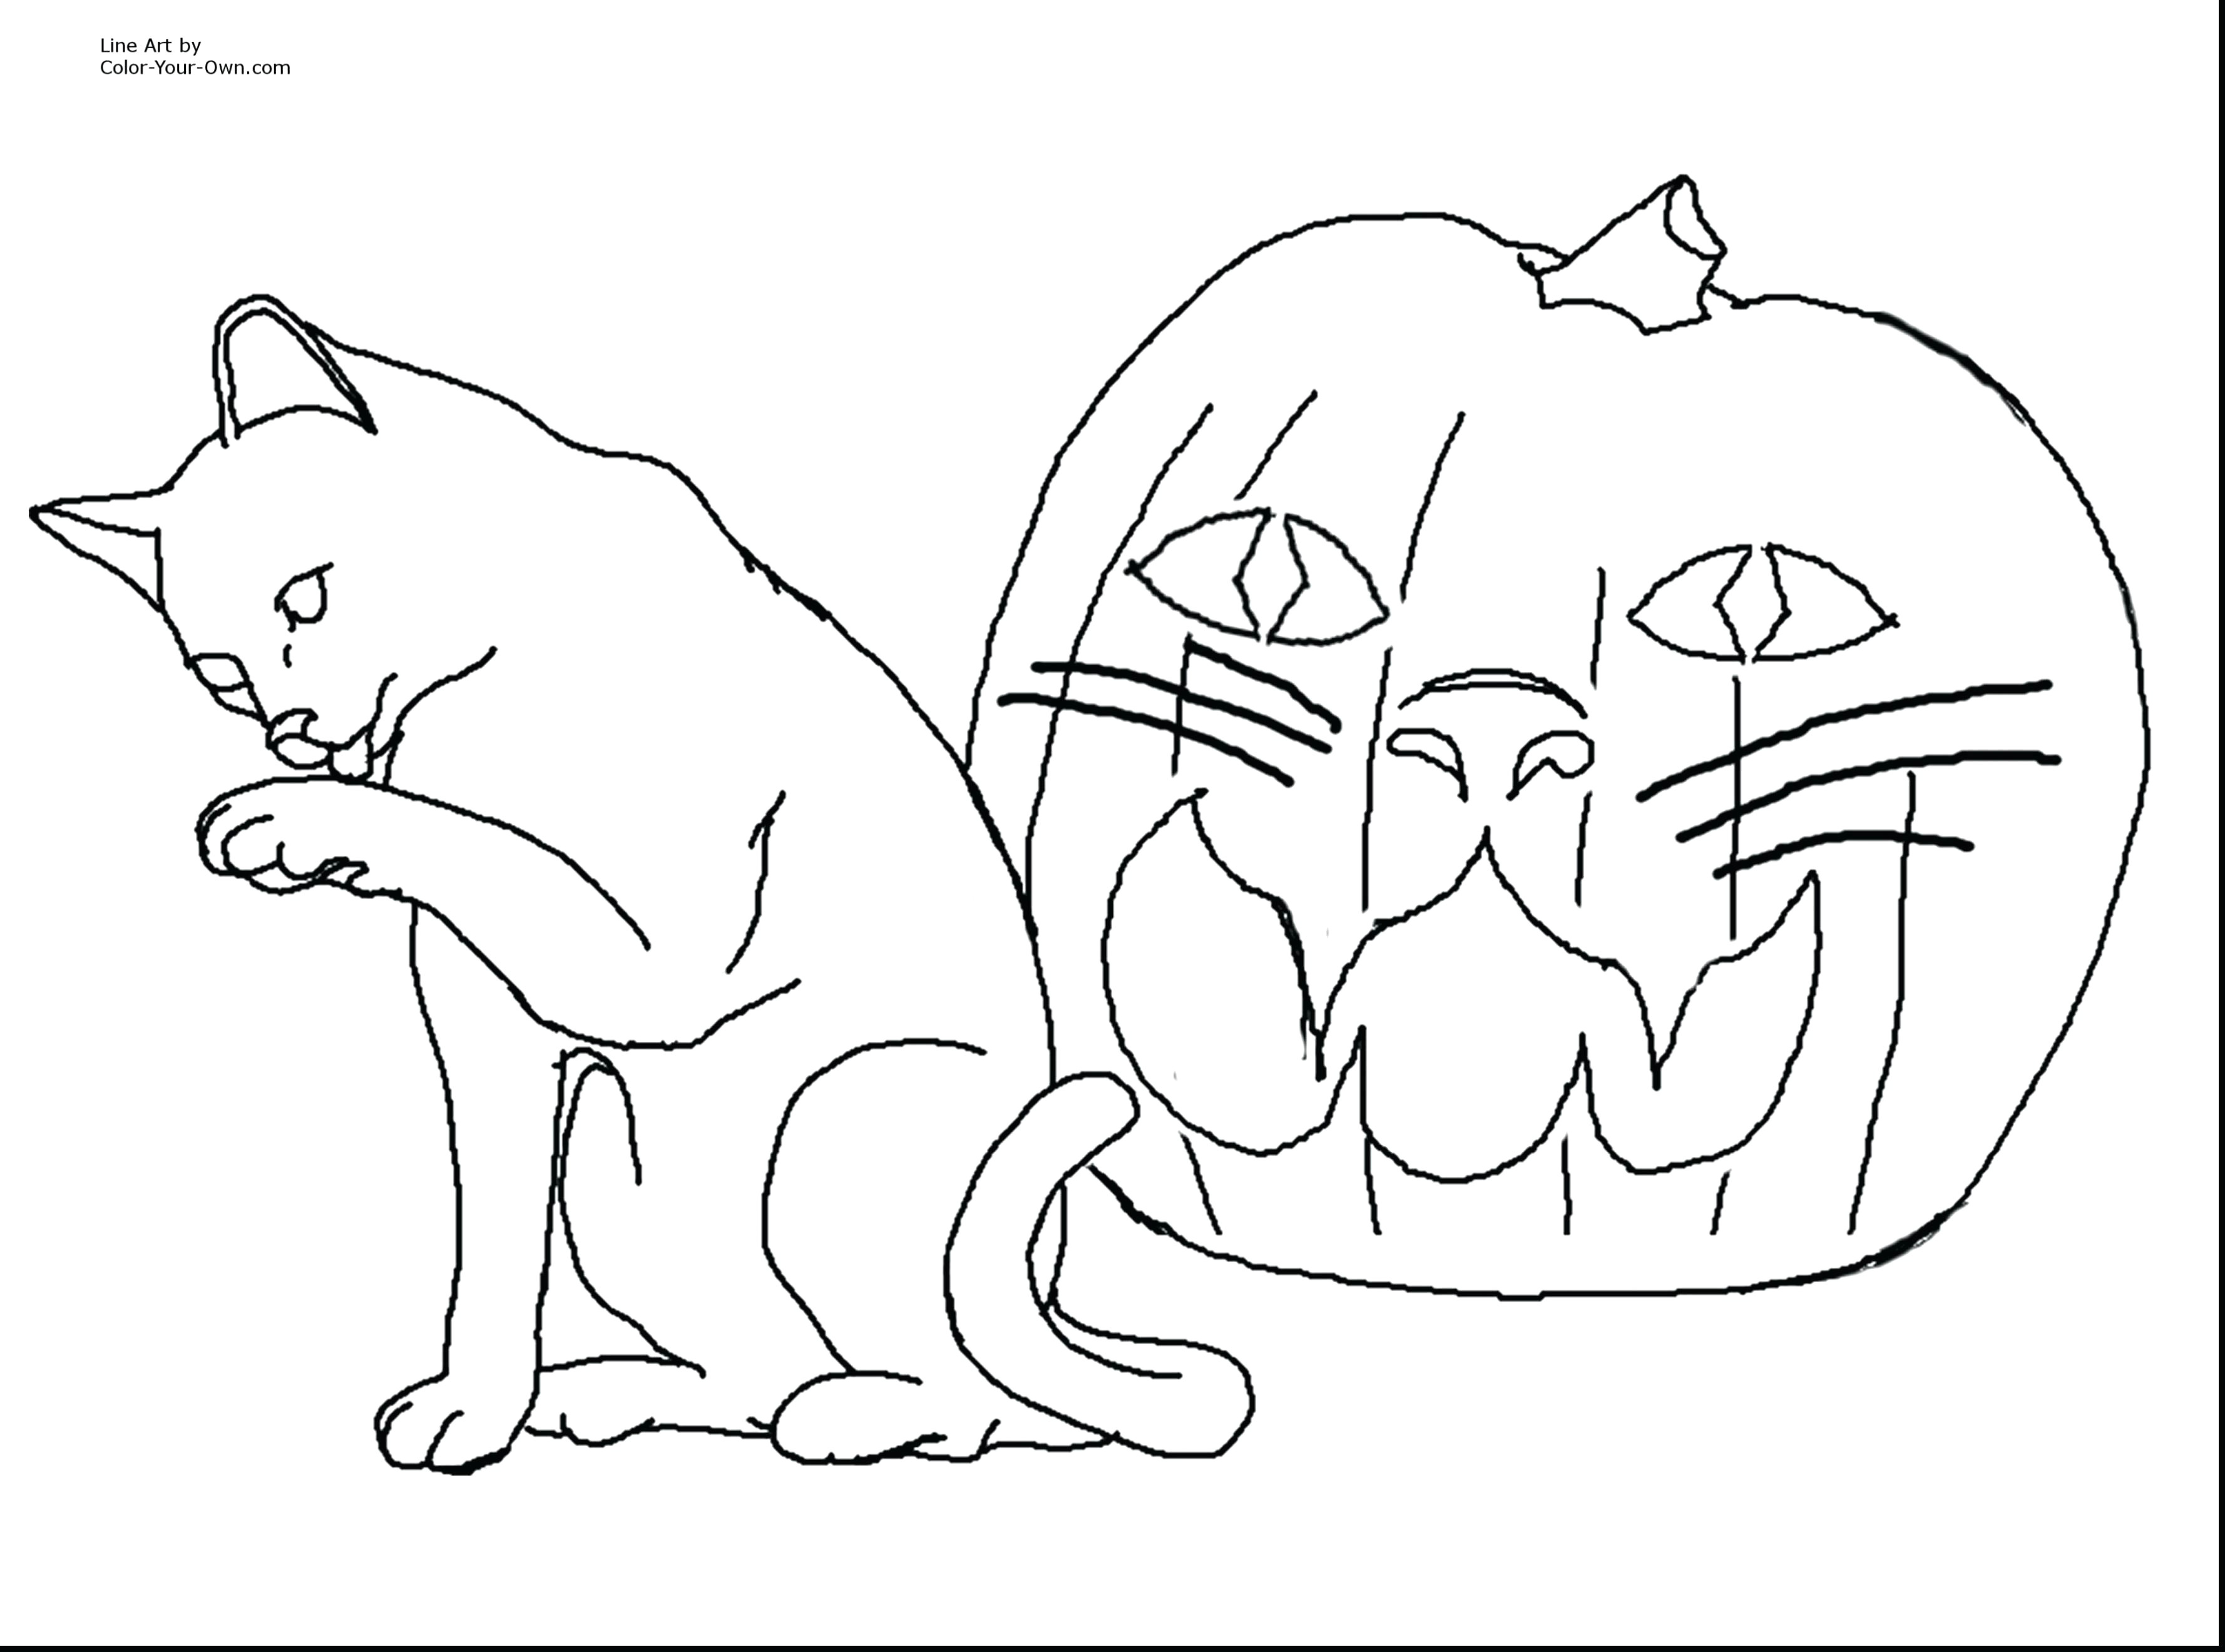 Picture Of A Drawing Of A Cat Coloring Pages Of Animals Preschool Color Pages Animals Luxury